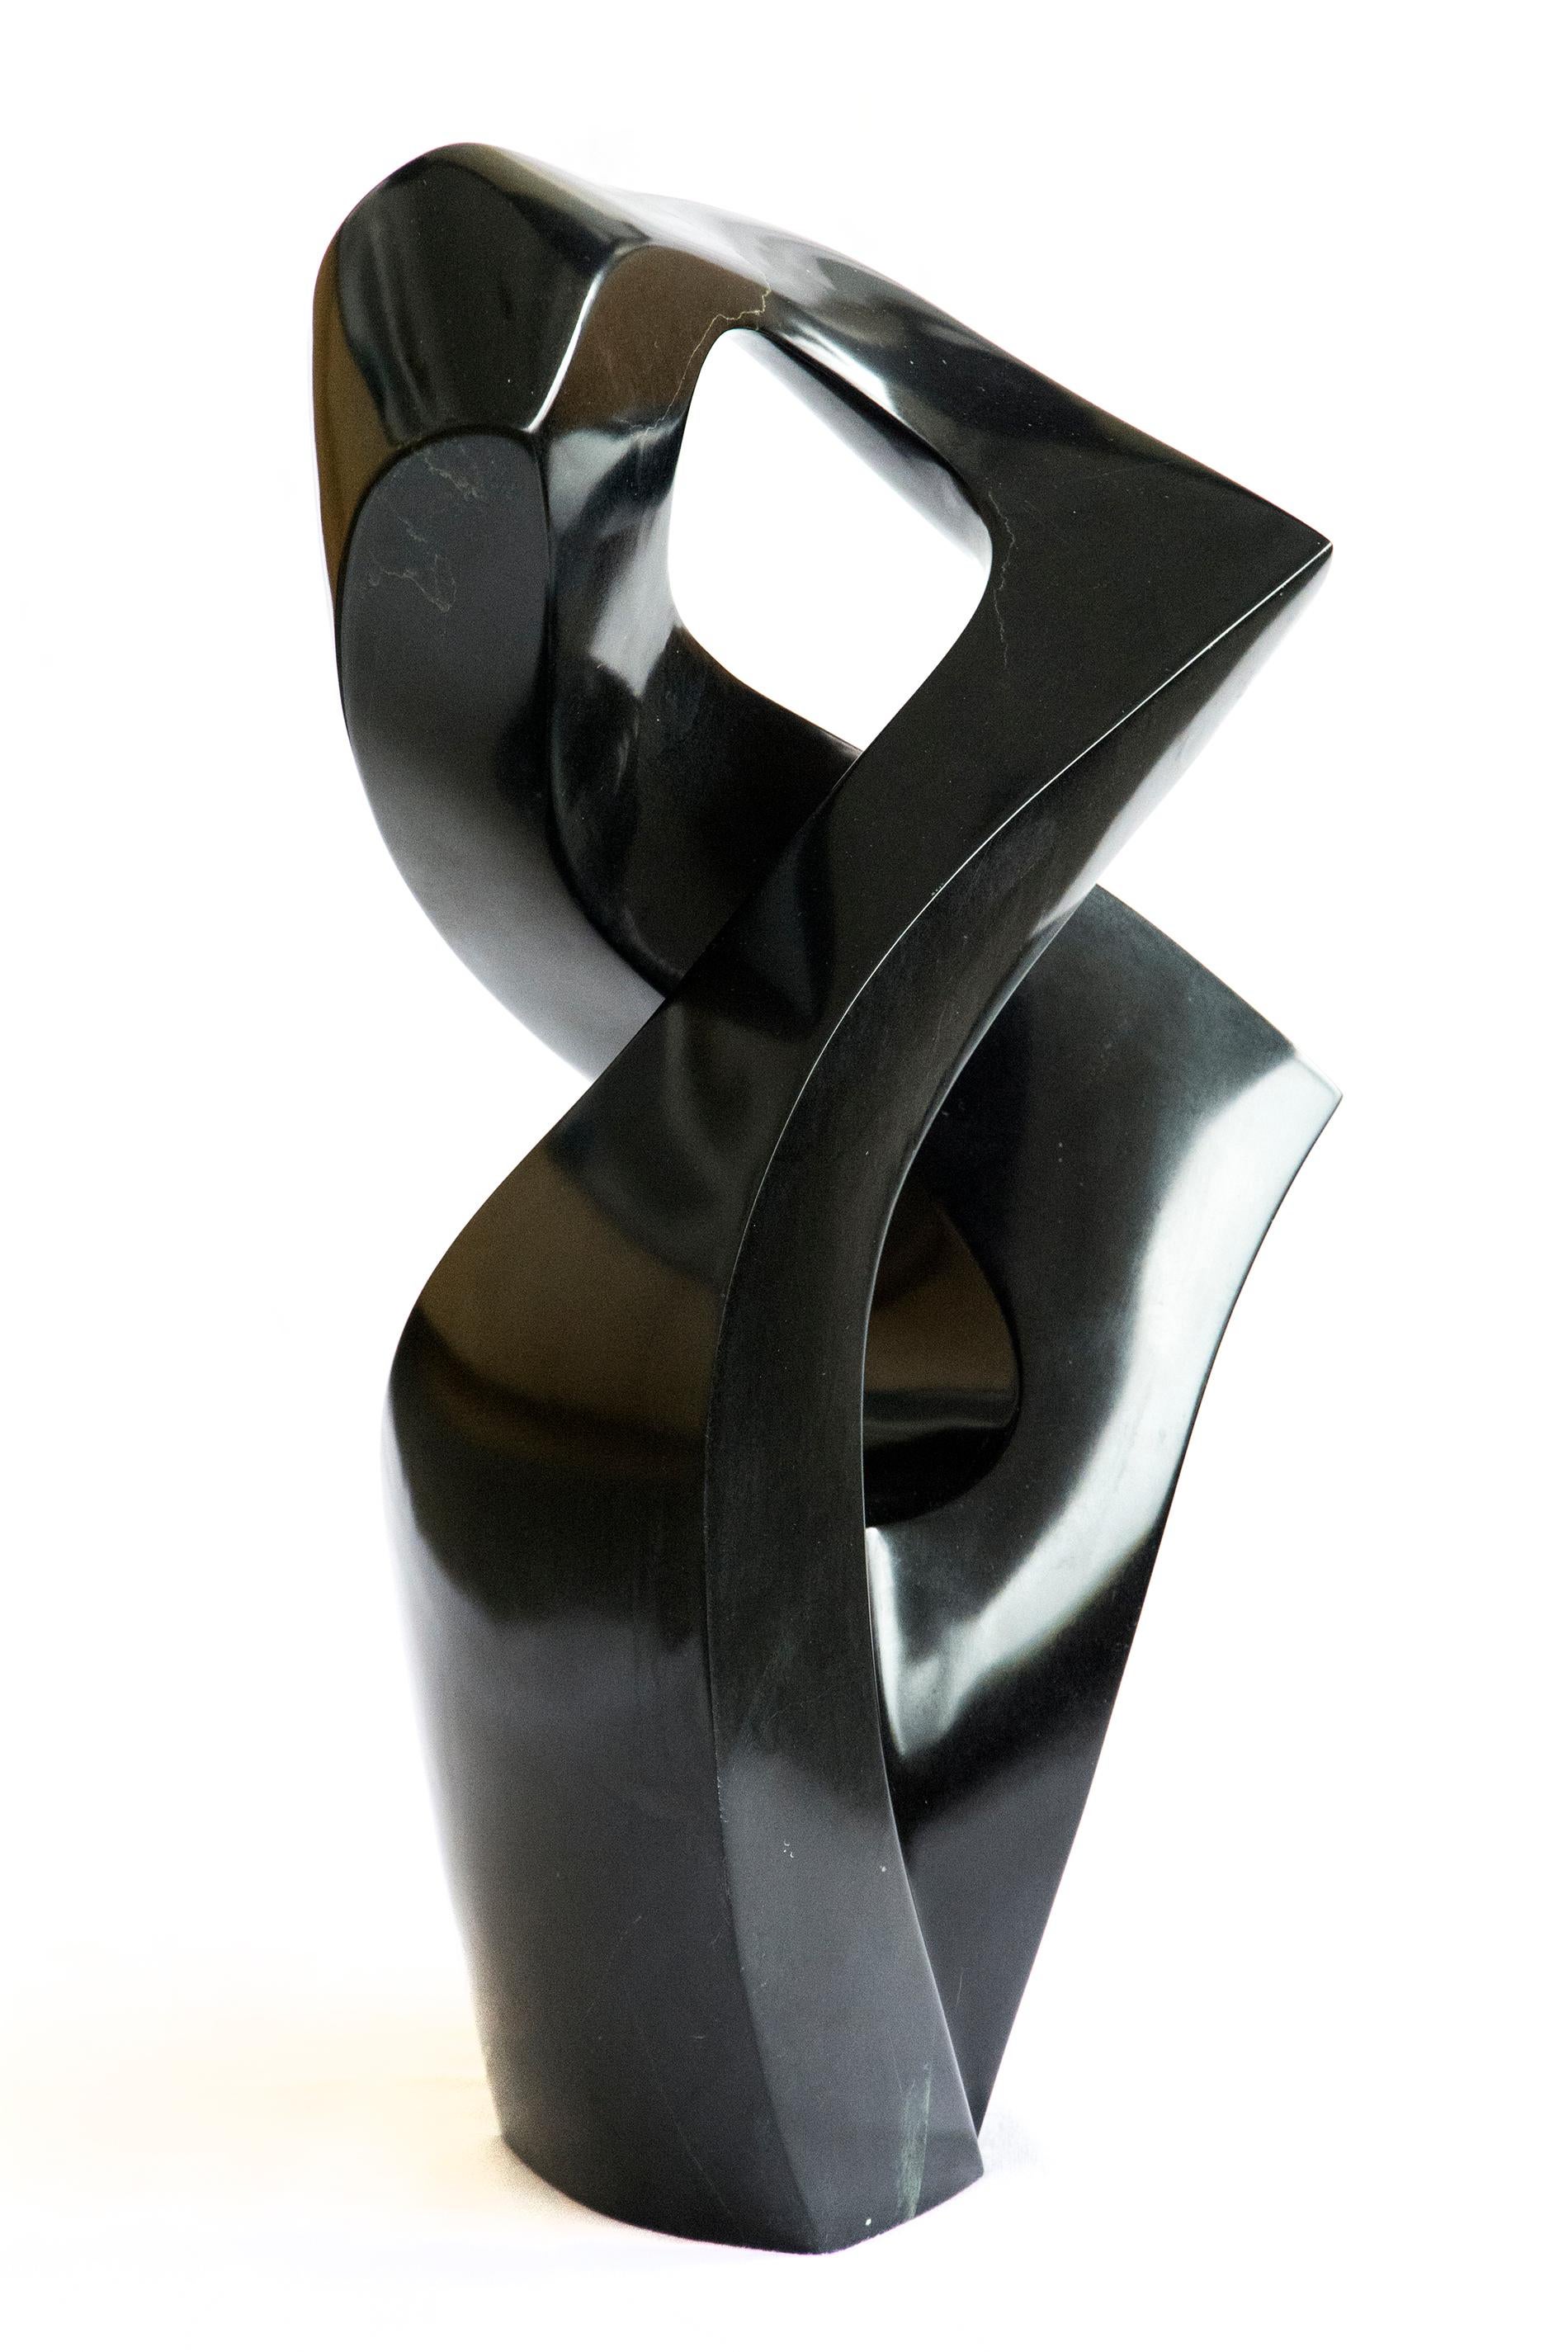 Embrace - small, smooth, polished, abstract, black marble sculpture - Sculpture by Jeremy Guy